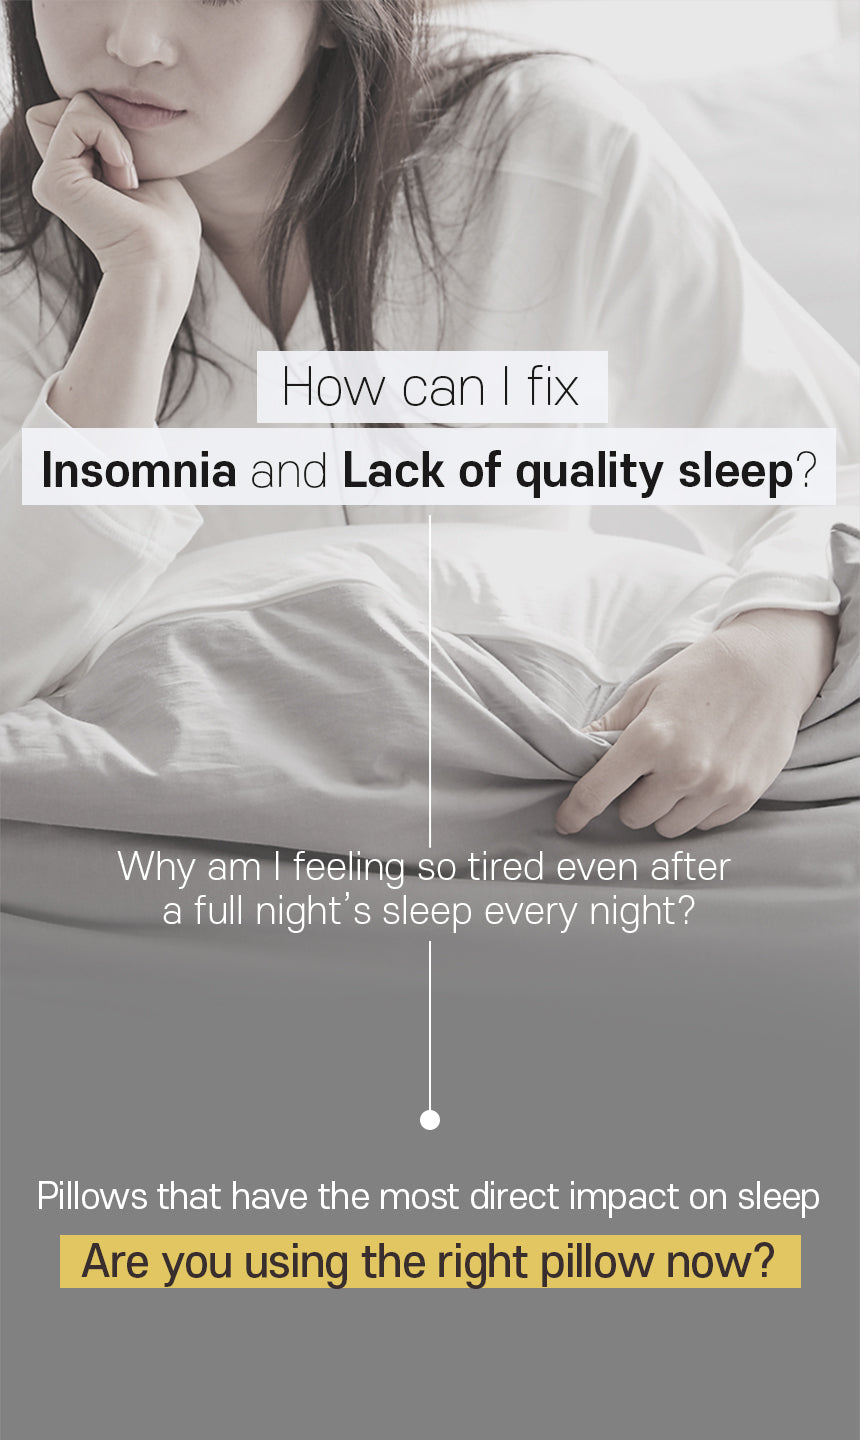 How can you fix insomnia and lack of quality sleep, Pillows that have the most direct impact on sleep.